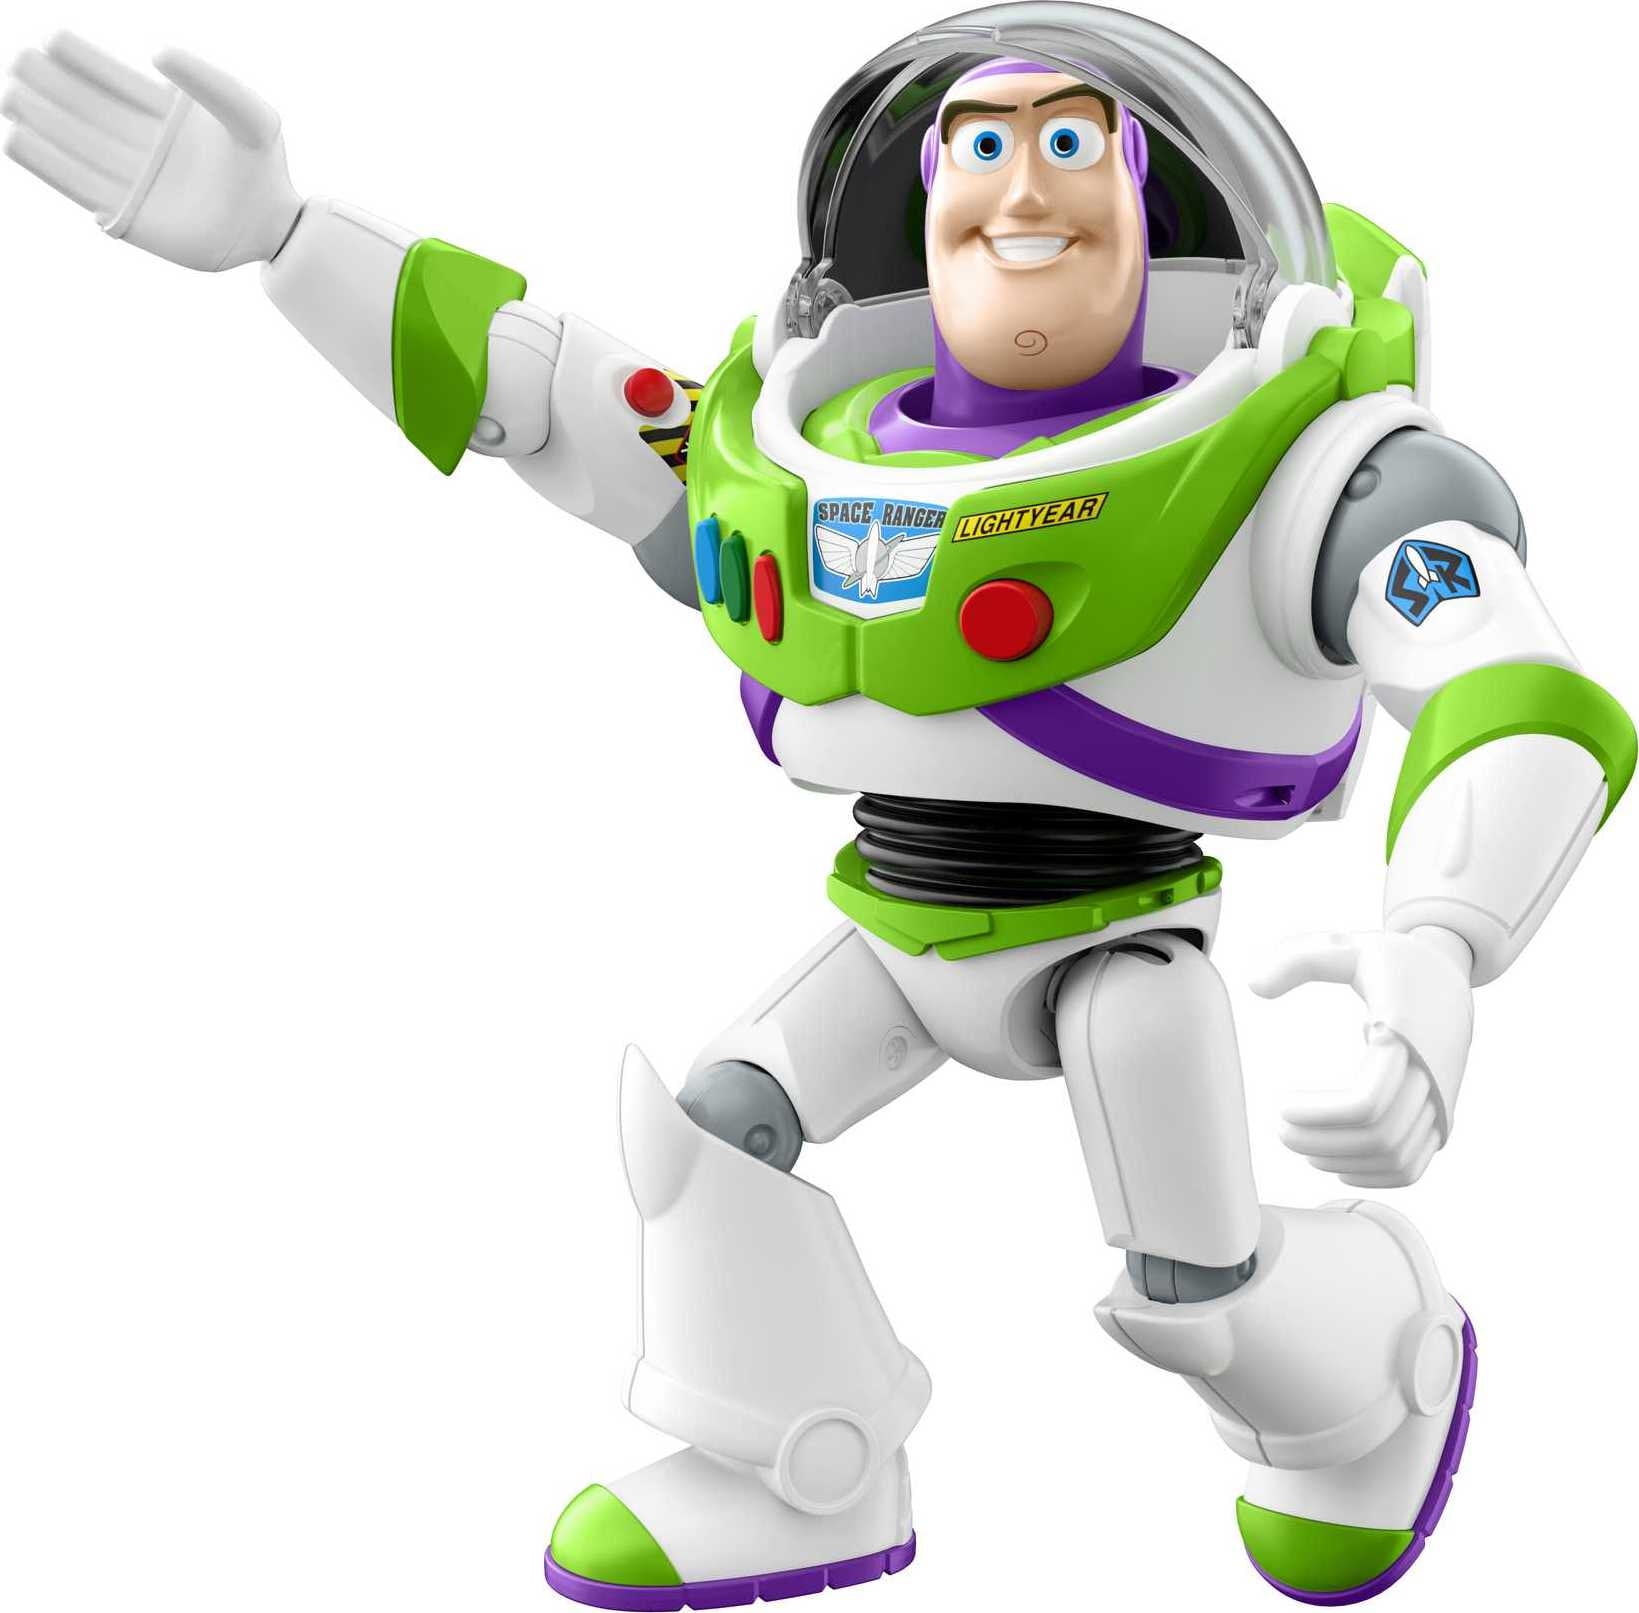 Disney Pixar Toy Story Action-chop Buzz Lightyear Figure, Karate Chop Motion and Sounds